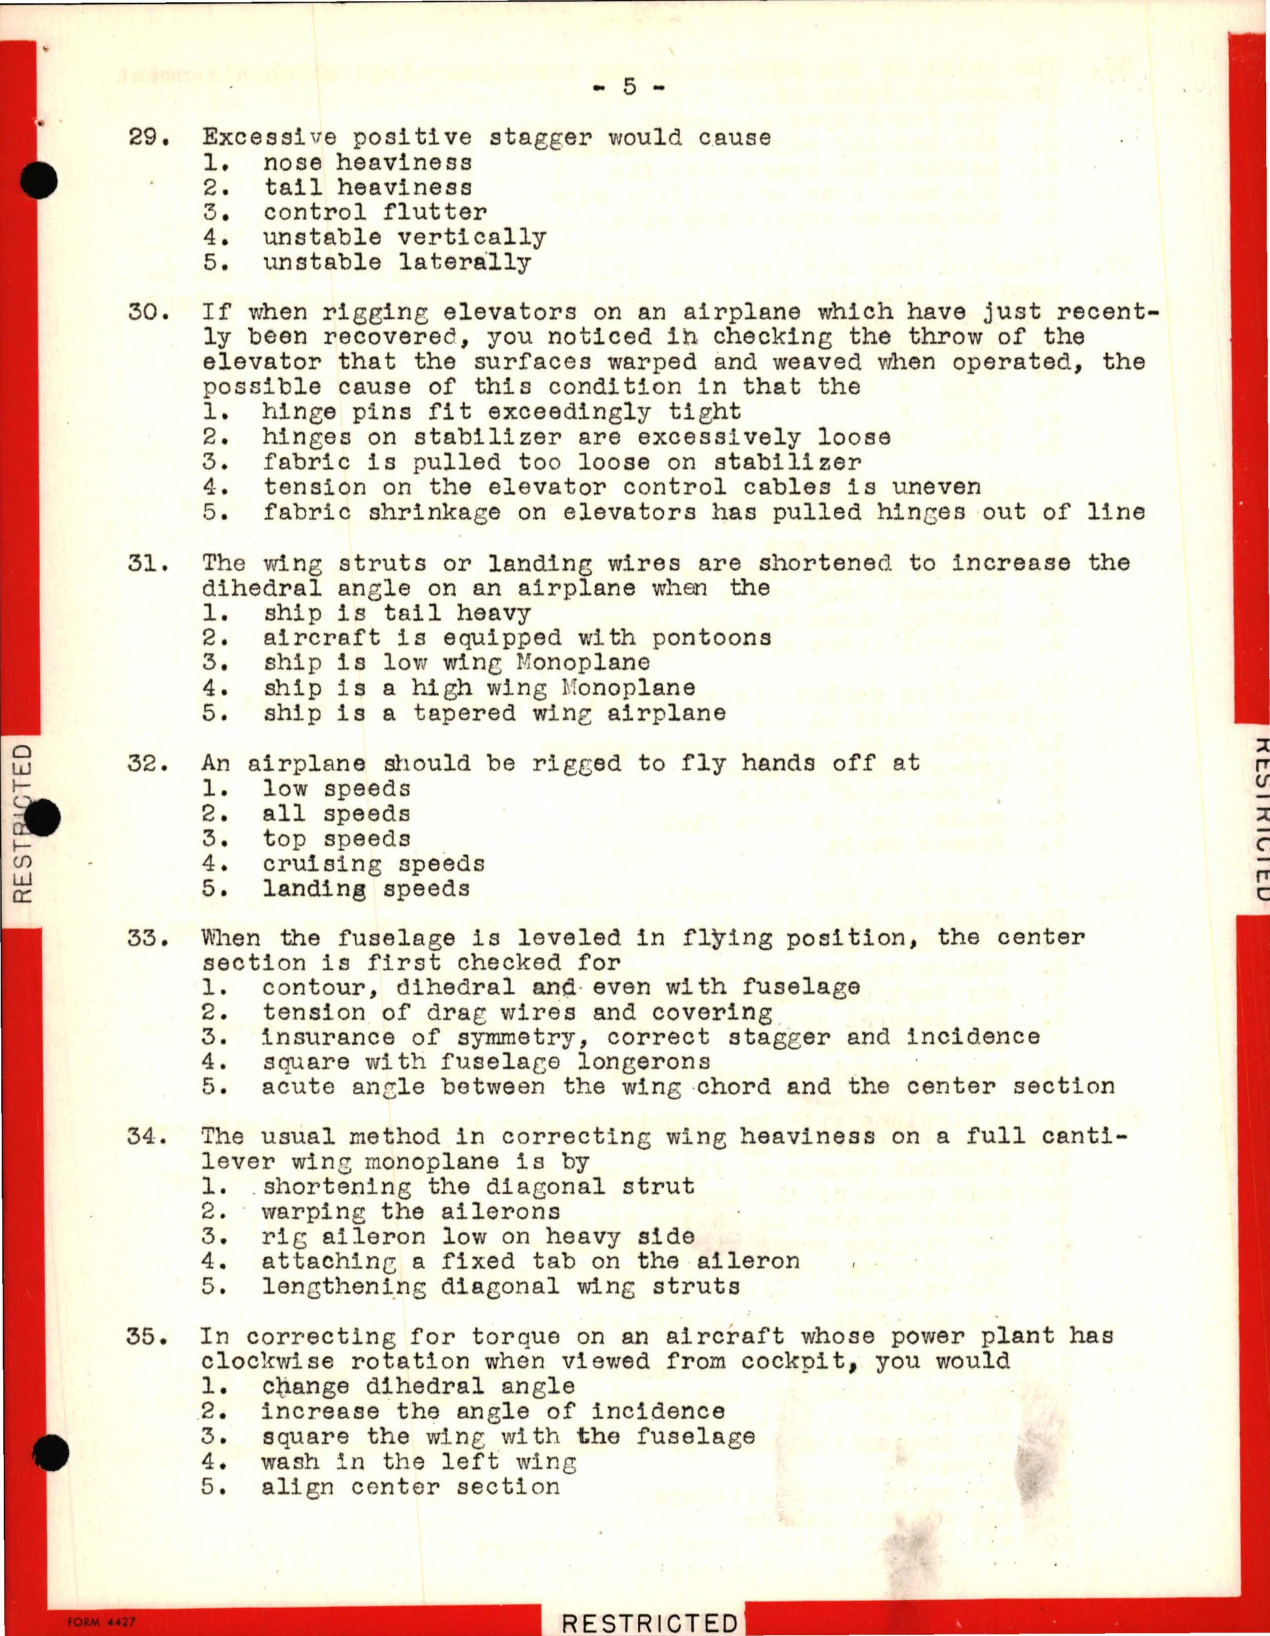 Sample page 5 from AirCorps Library document: Instructor Training Questions for Rigging and Assembly, Lockheed-Vega Service School